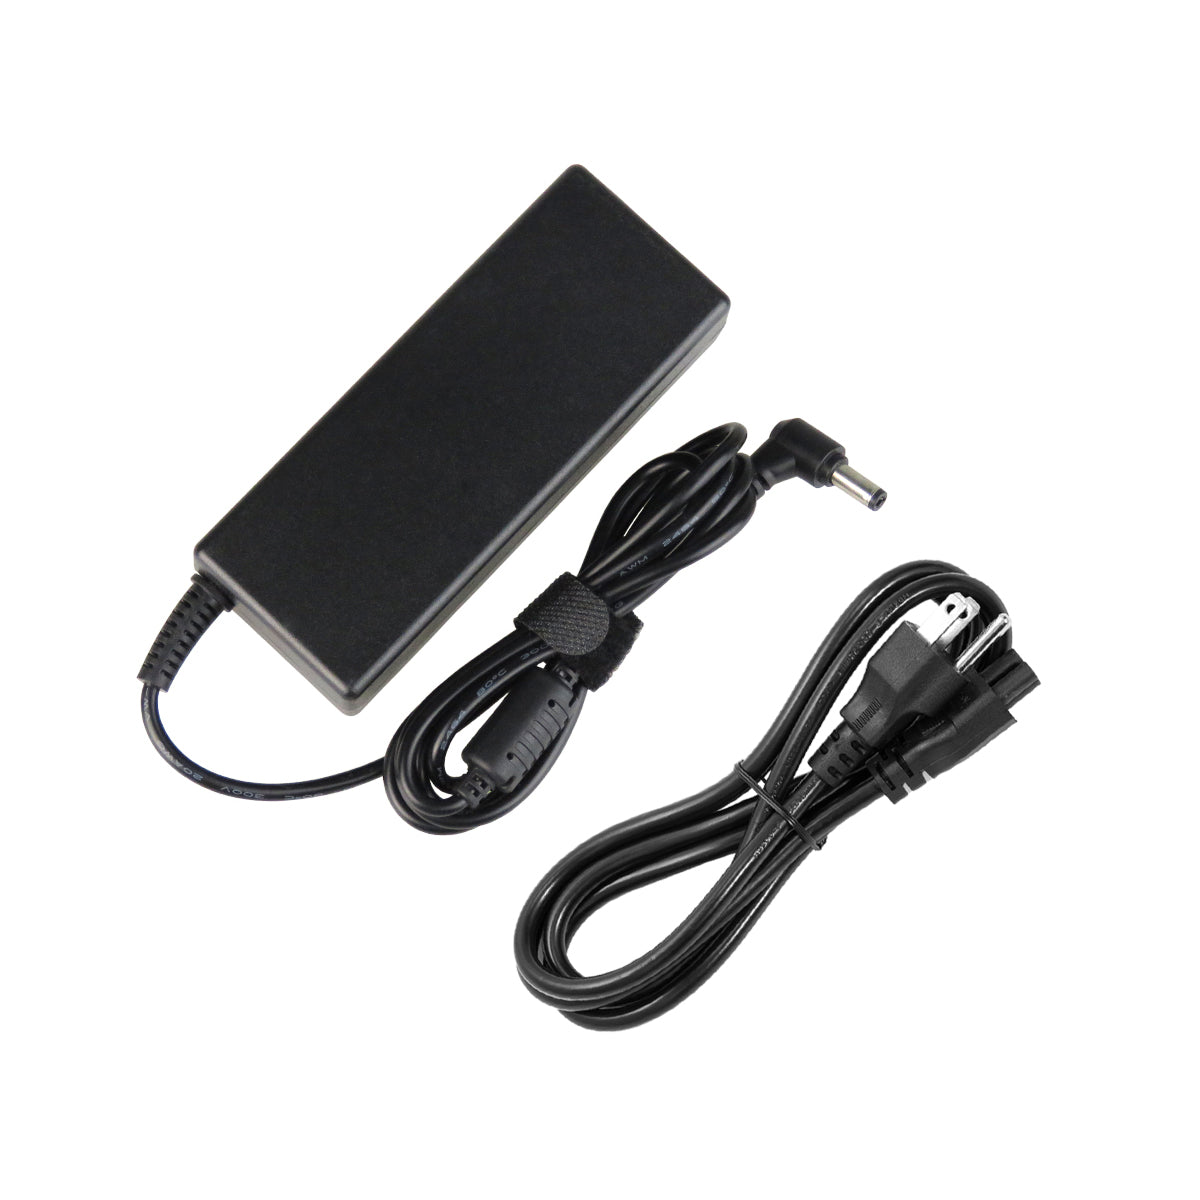 AC Adapter Charger for ASUS x81L Notebook.